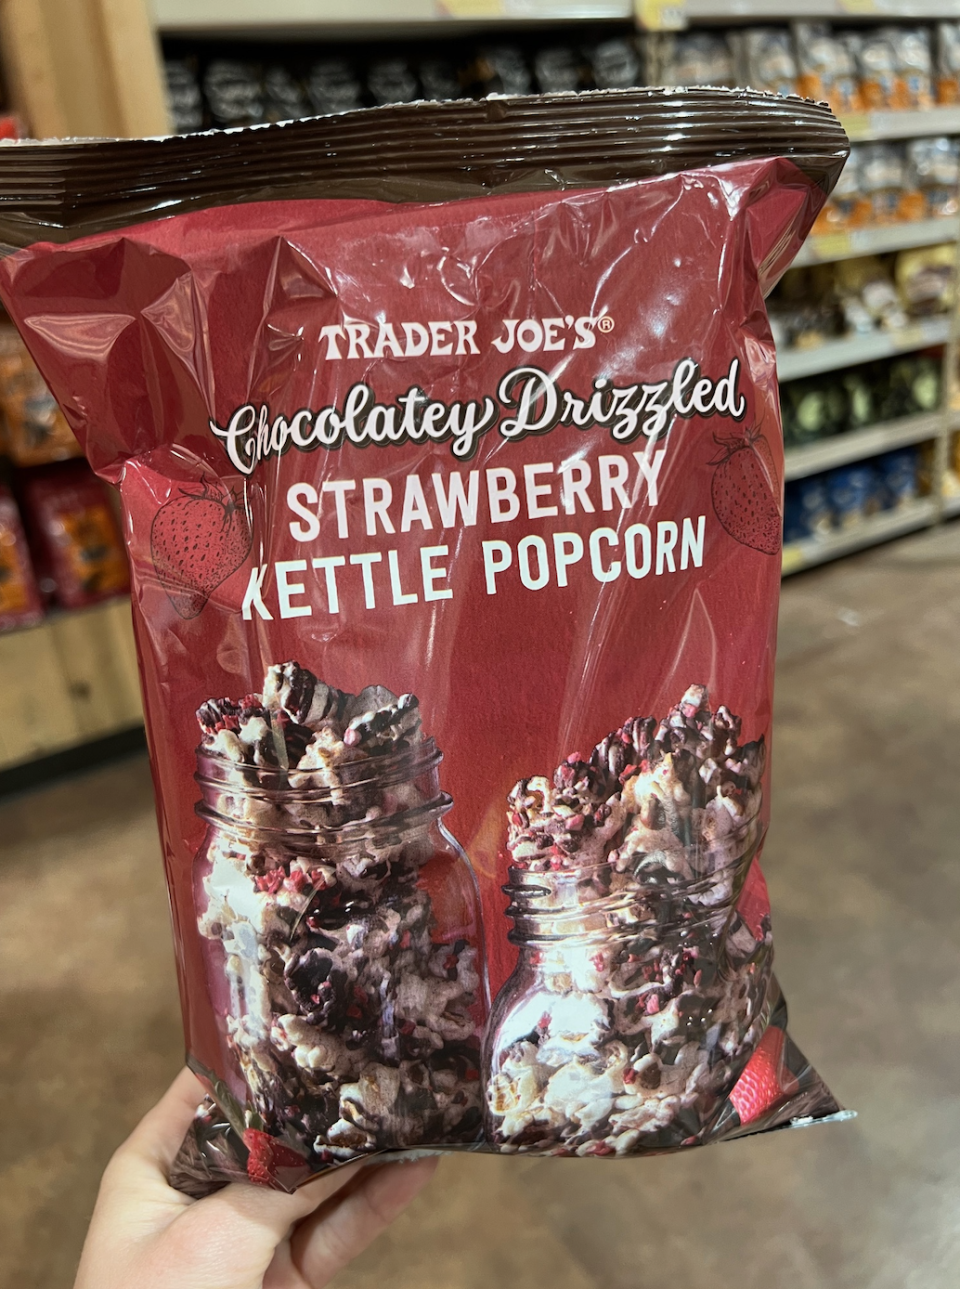 Hand holding a bag of Trader Joe's Chocolatey Drizzled Strawberry Kettle Popcorn